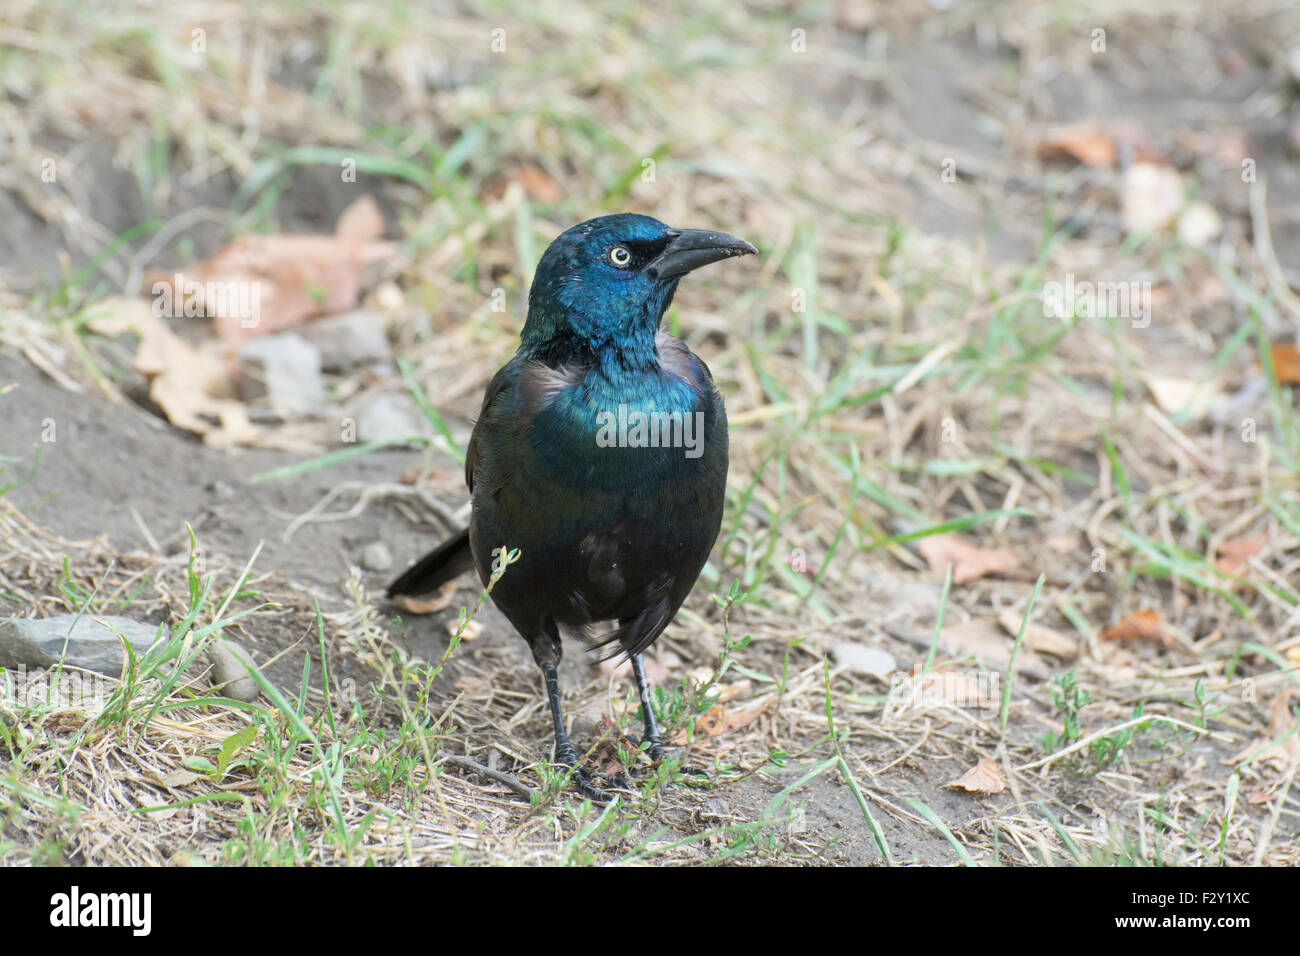 Common grackle (Quiscalus quiscula) on Boston Common Stock Photo